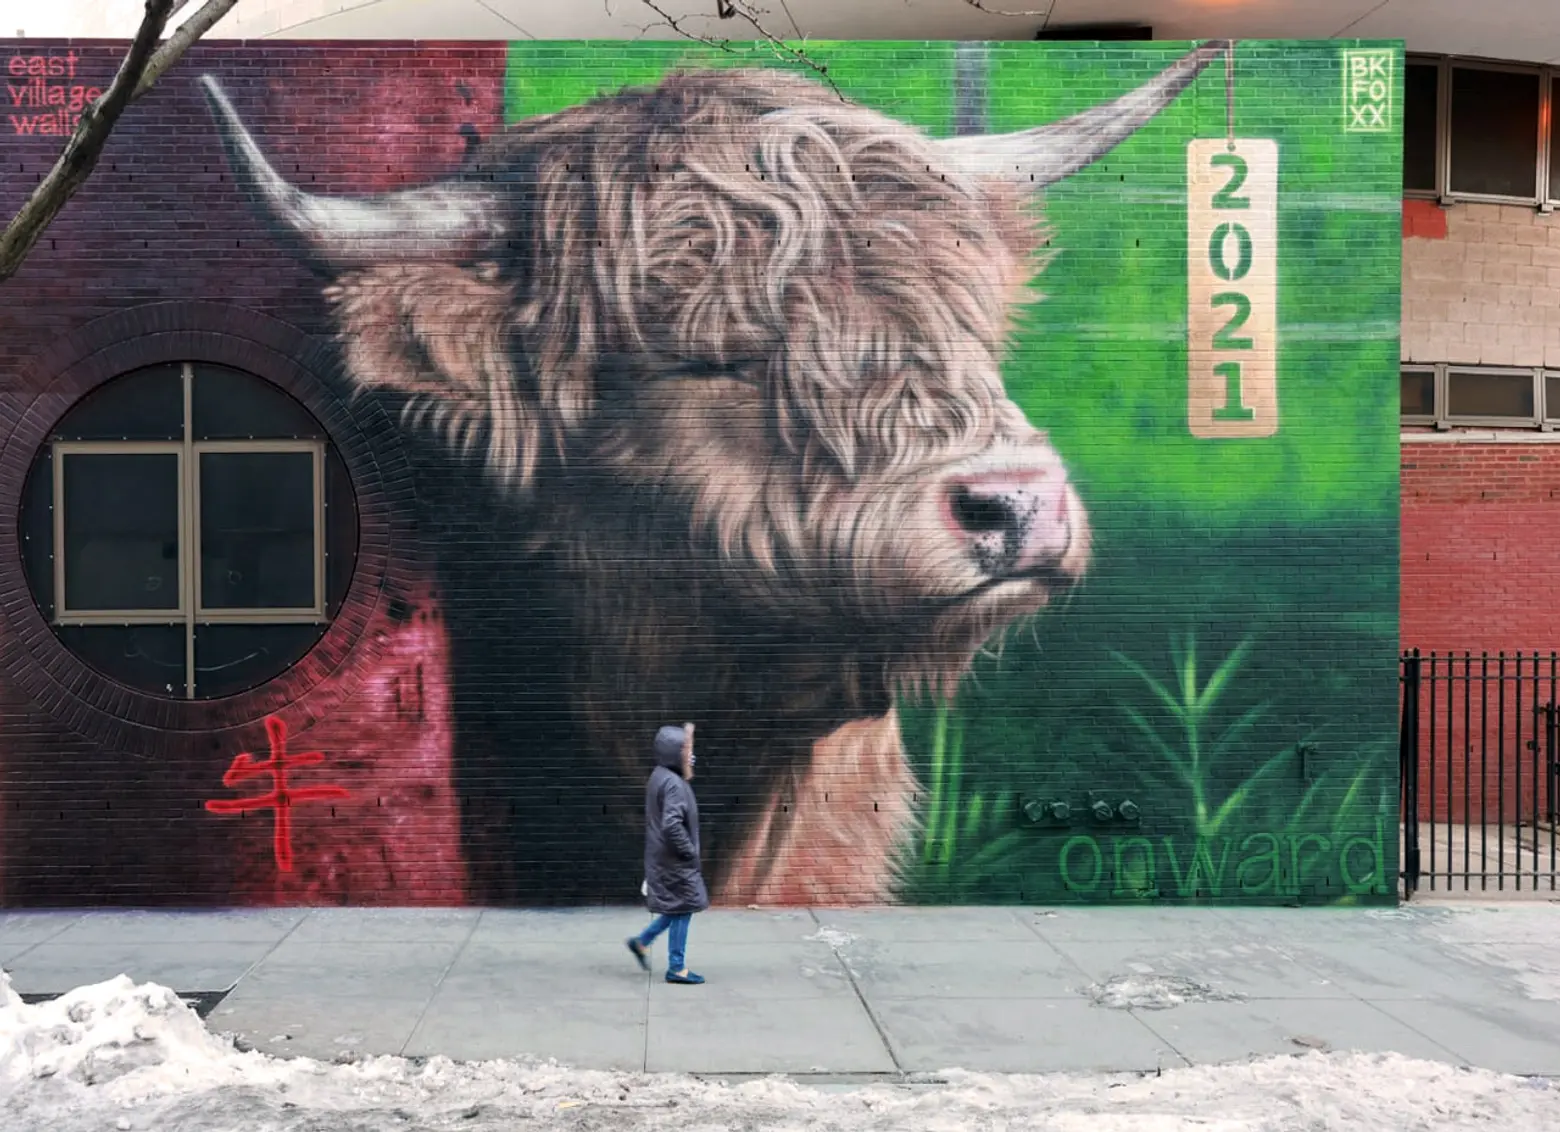 Artist BKFoxx debuts new Year of the Ox mural in Chinatown